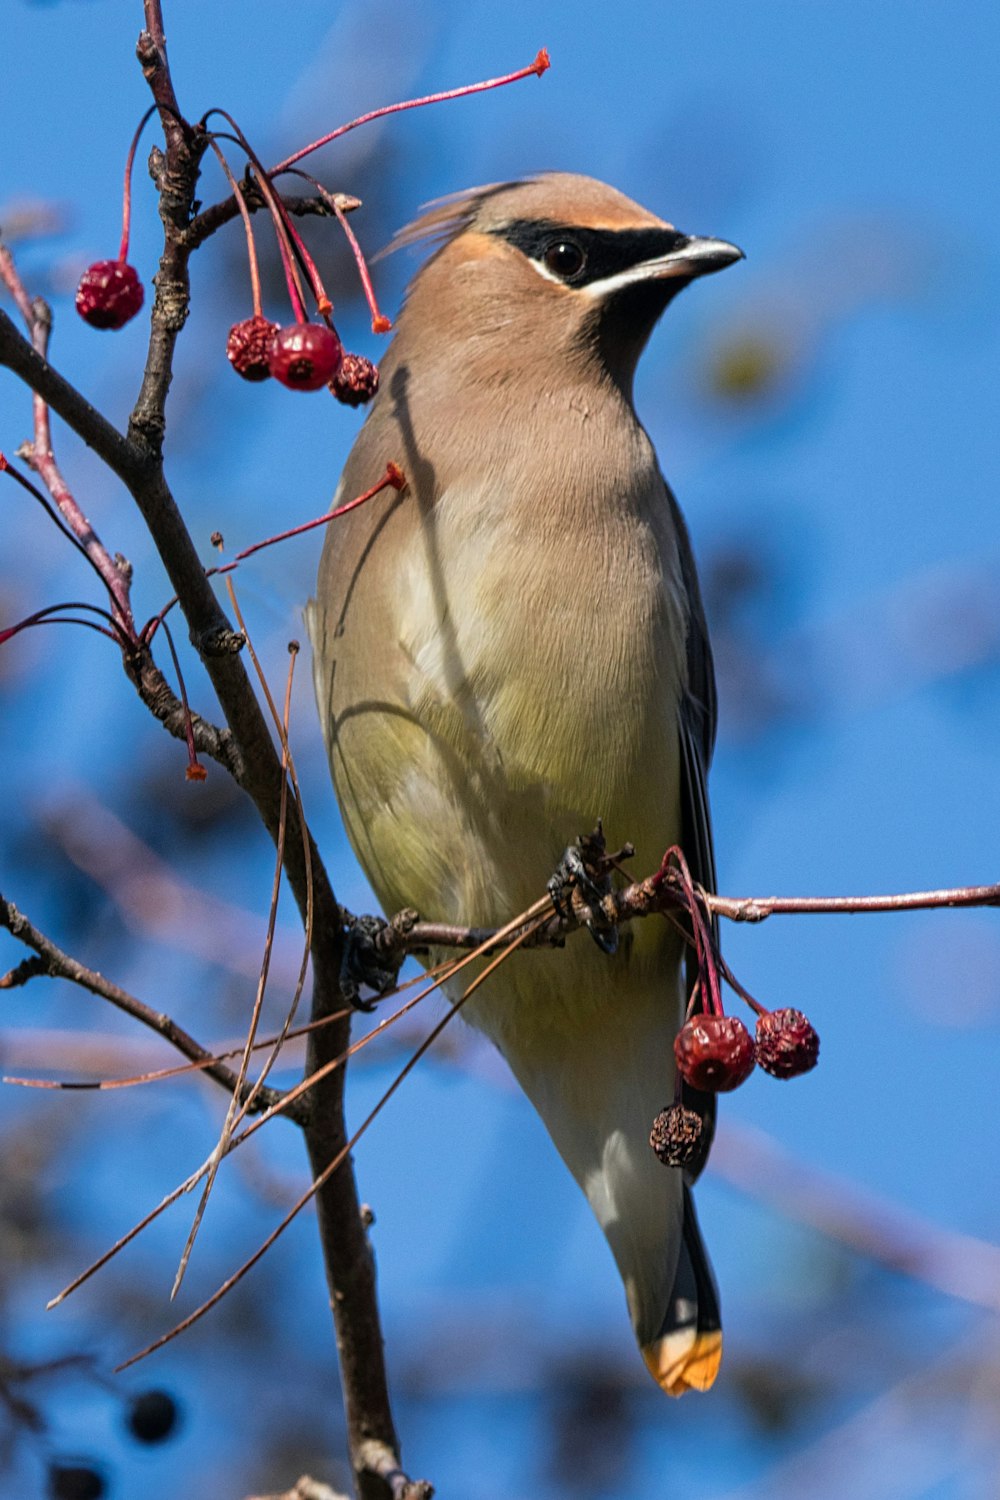 a bird is perched on a branch with berries